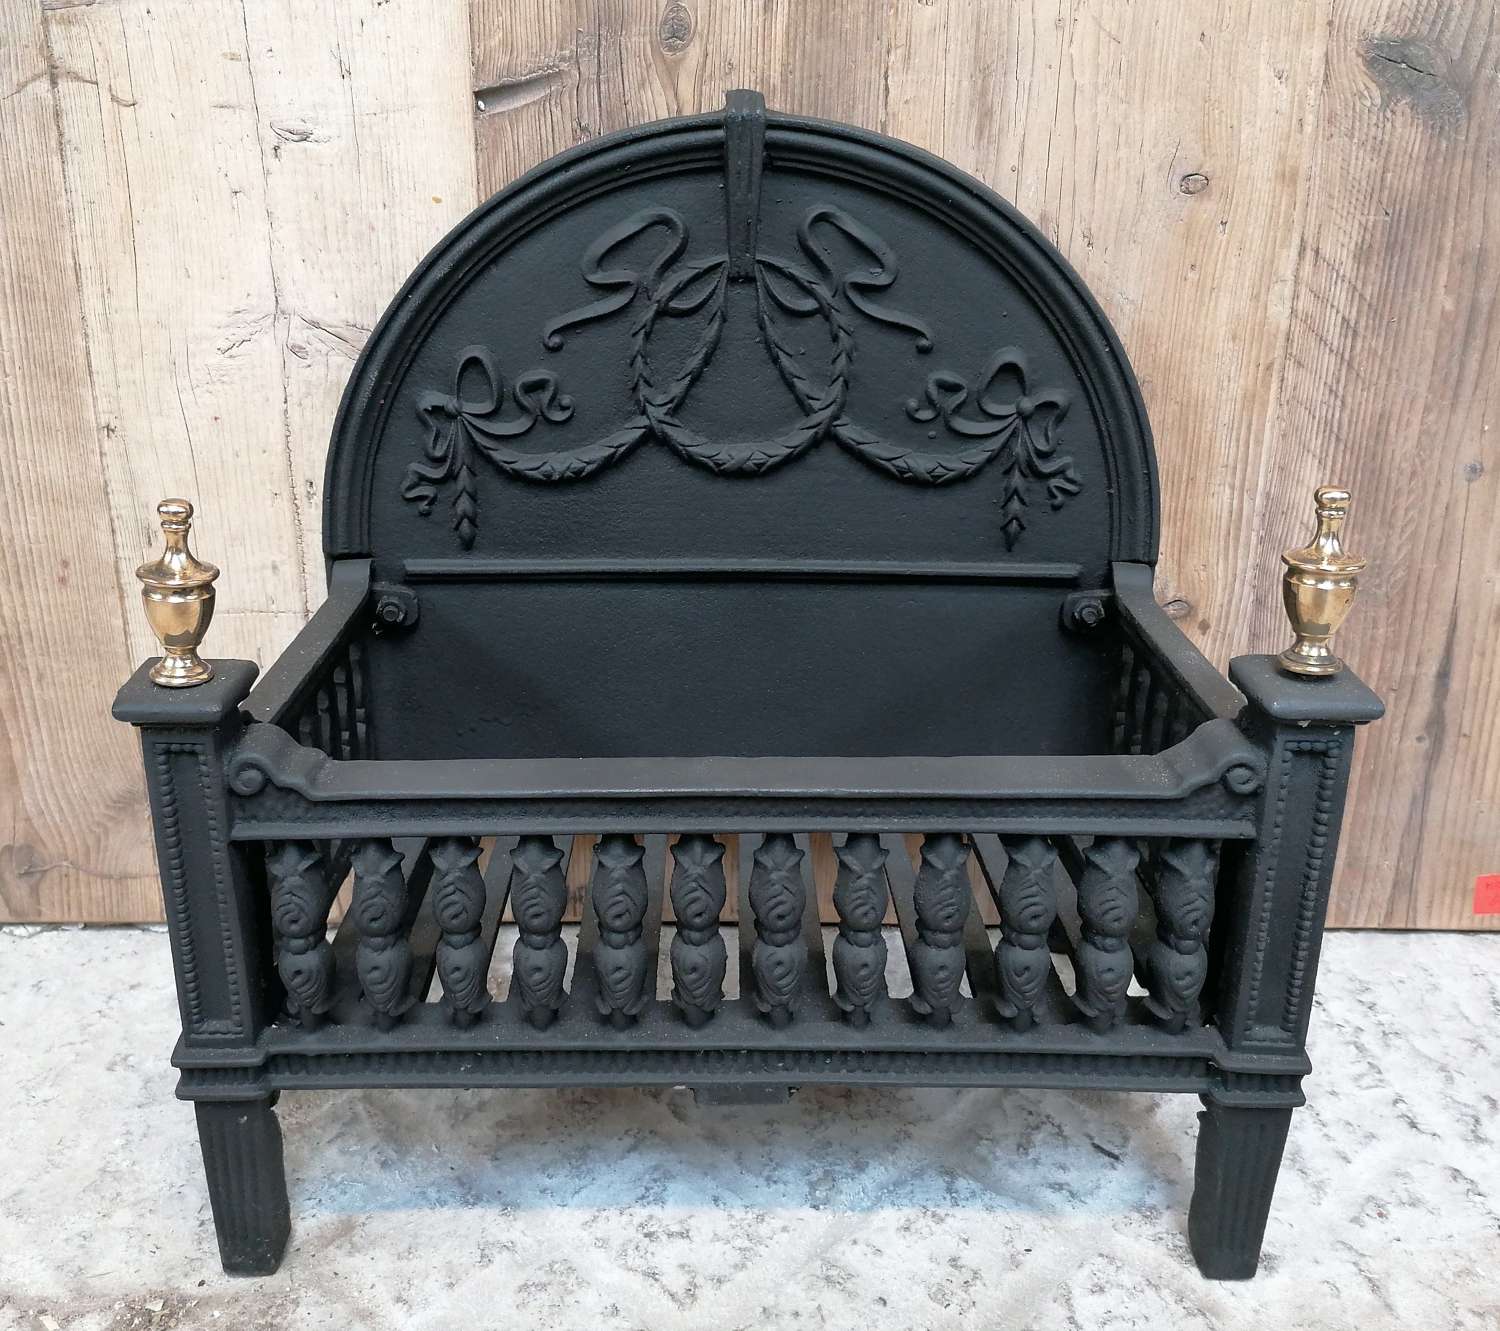 FB0056 PRETTY AND PETITE RECLAIMED REPRODUCTION CAST IRON FIRE BASKET